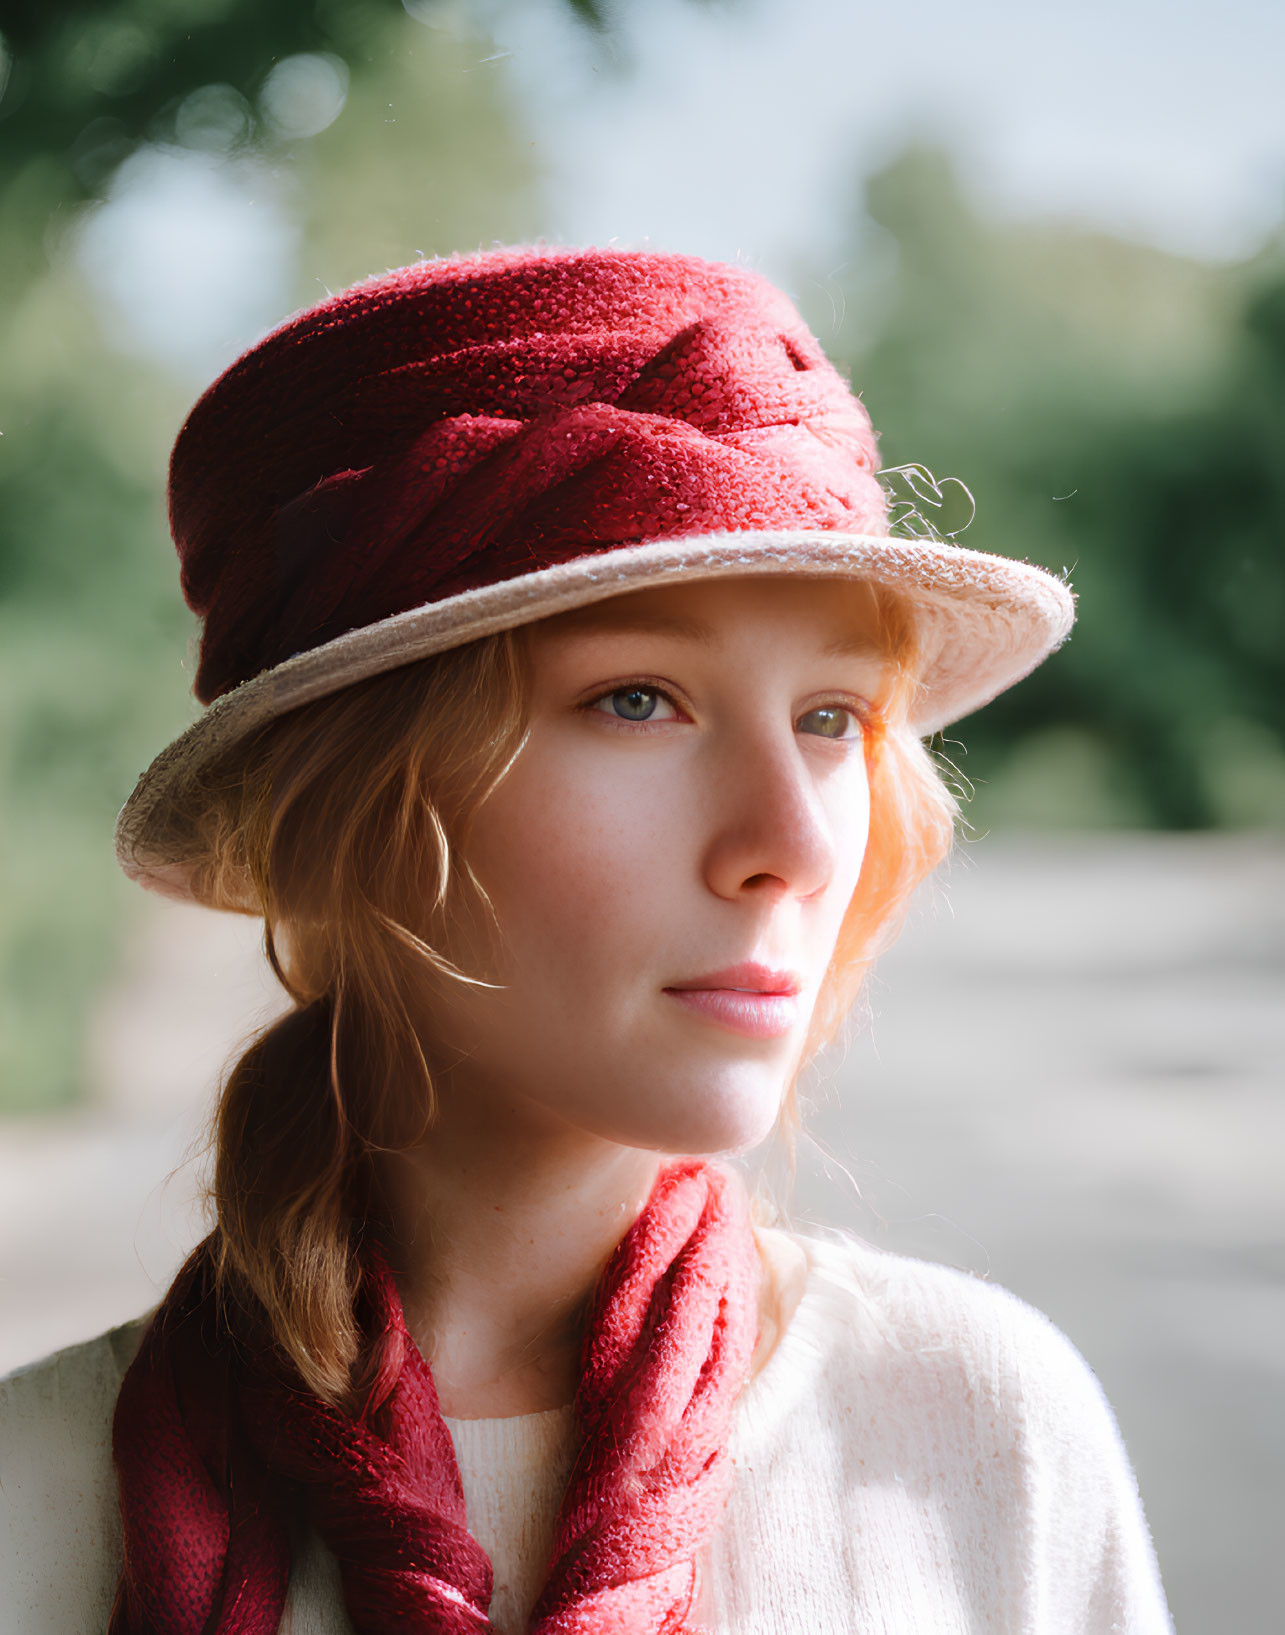 Light-haired woman in red hat and scarf gazes softly, set against green backdrop